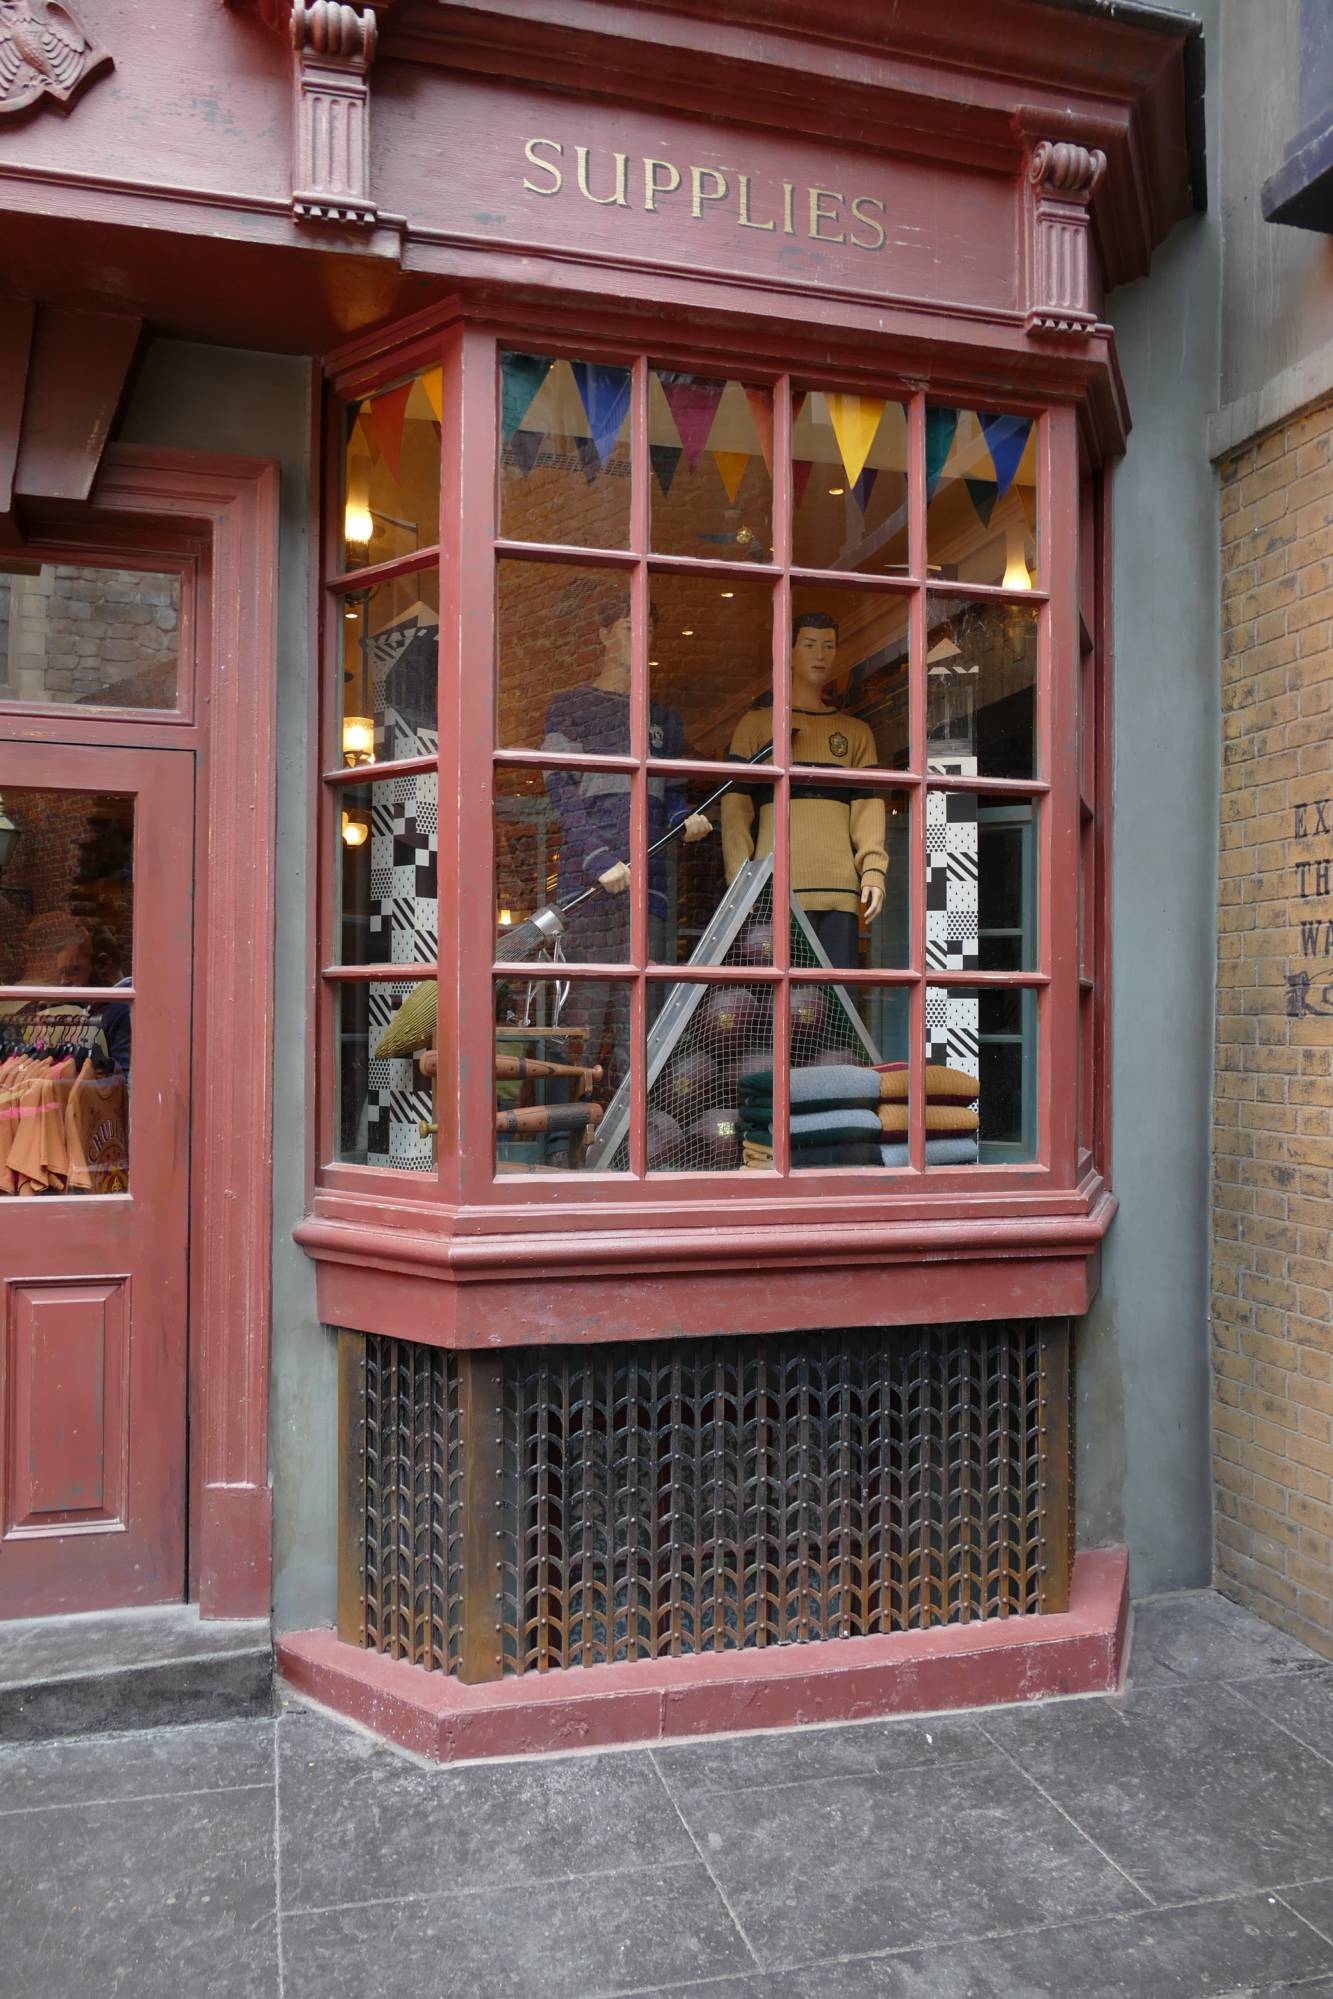 Diagon Alley - Wizarding World of Harry Potter at Universal Studios Florida